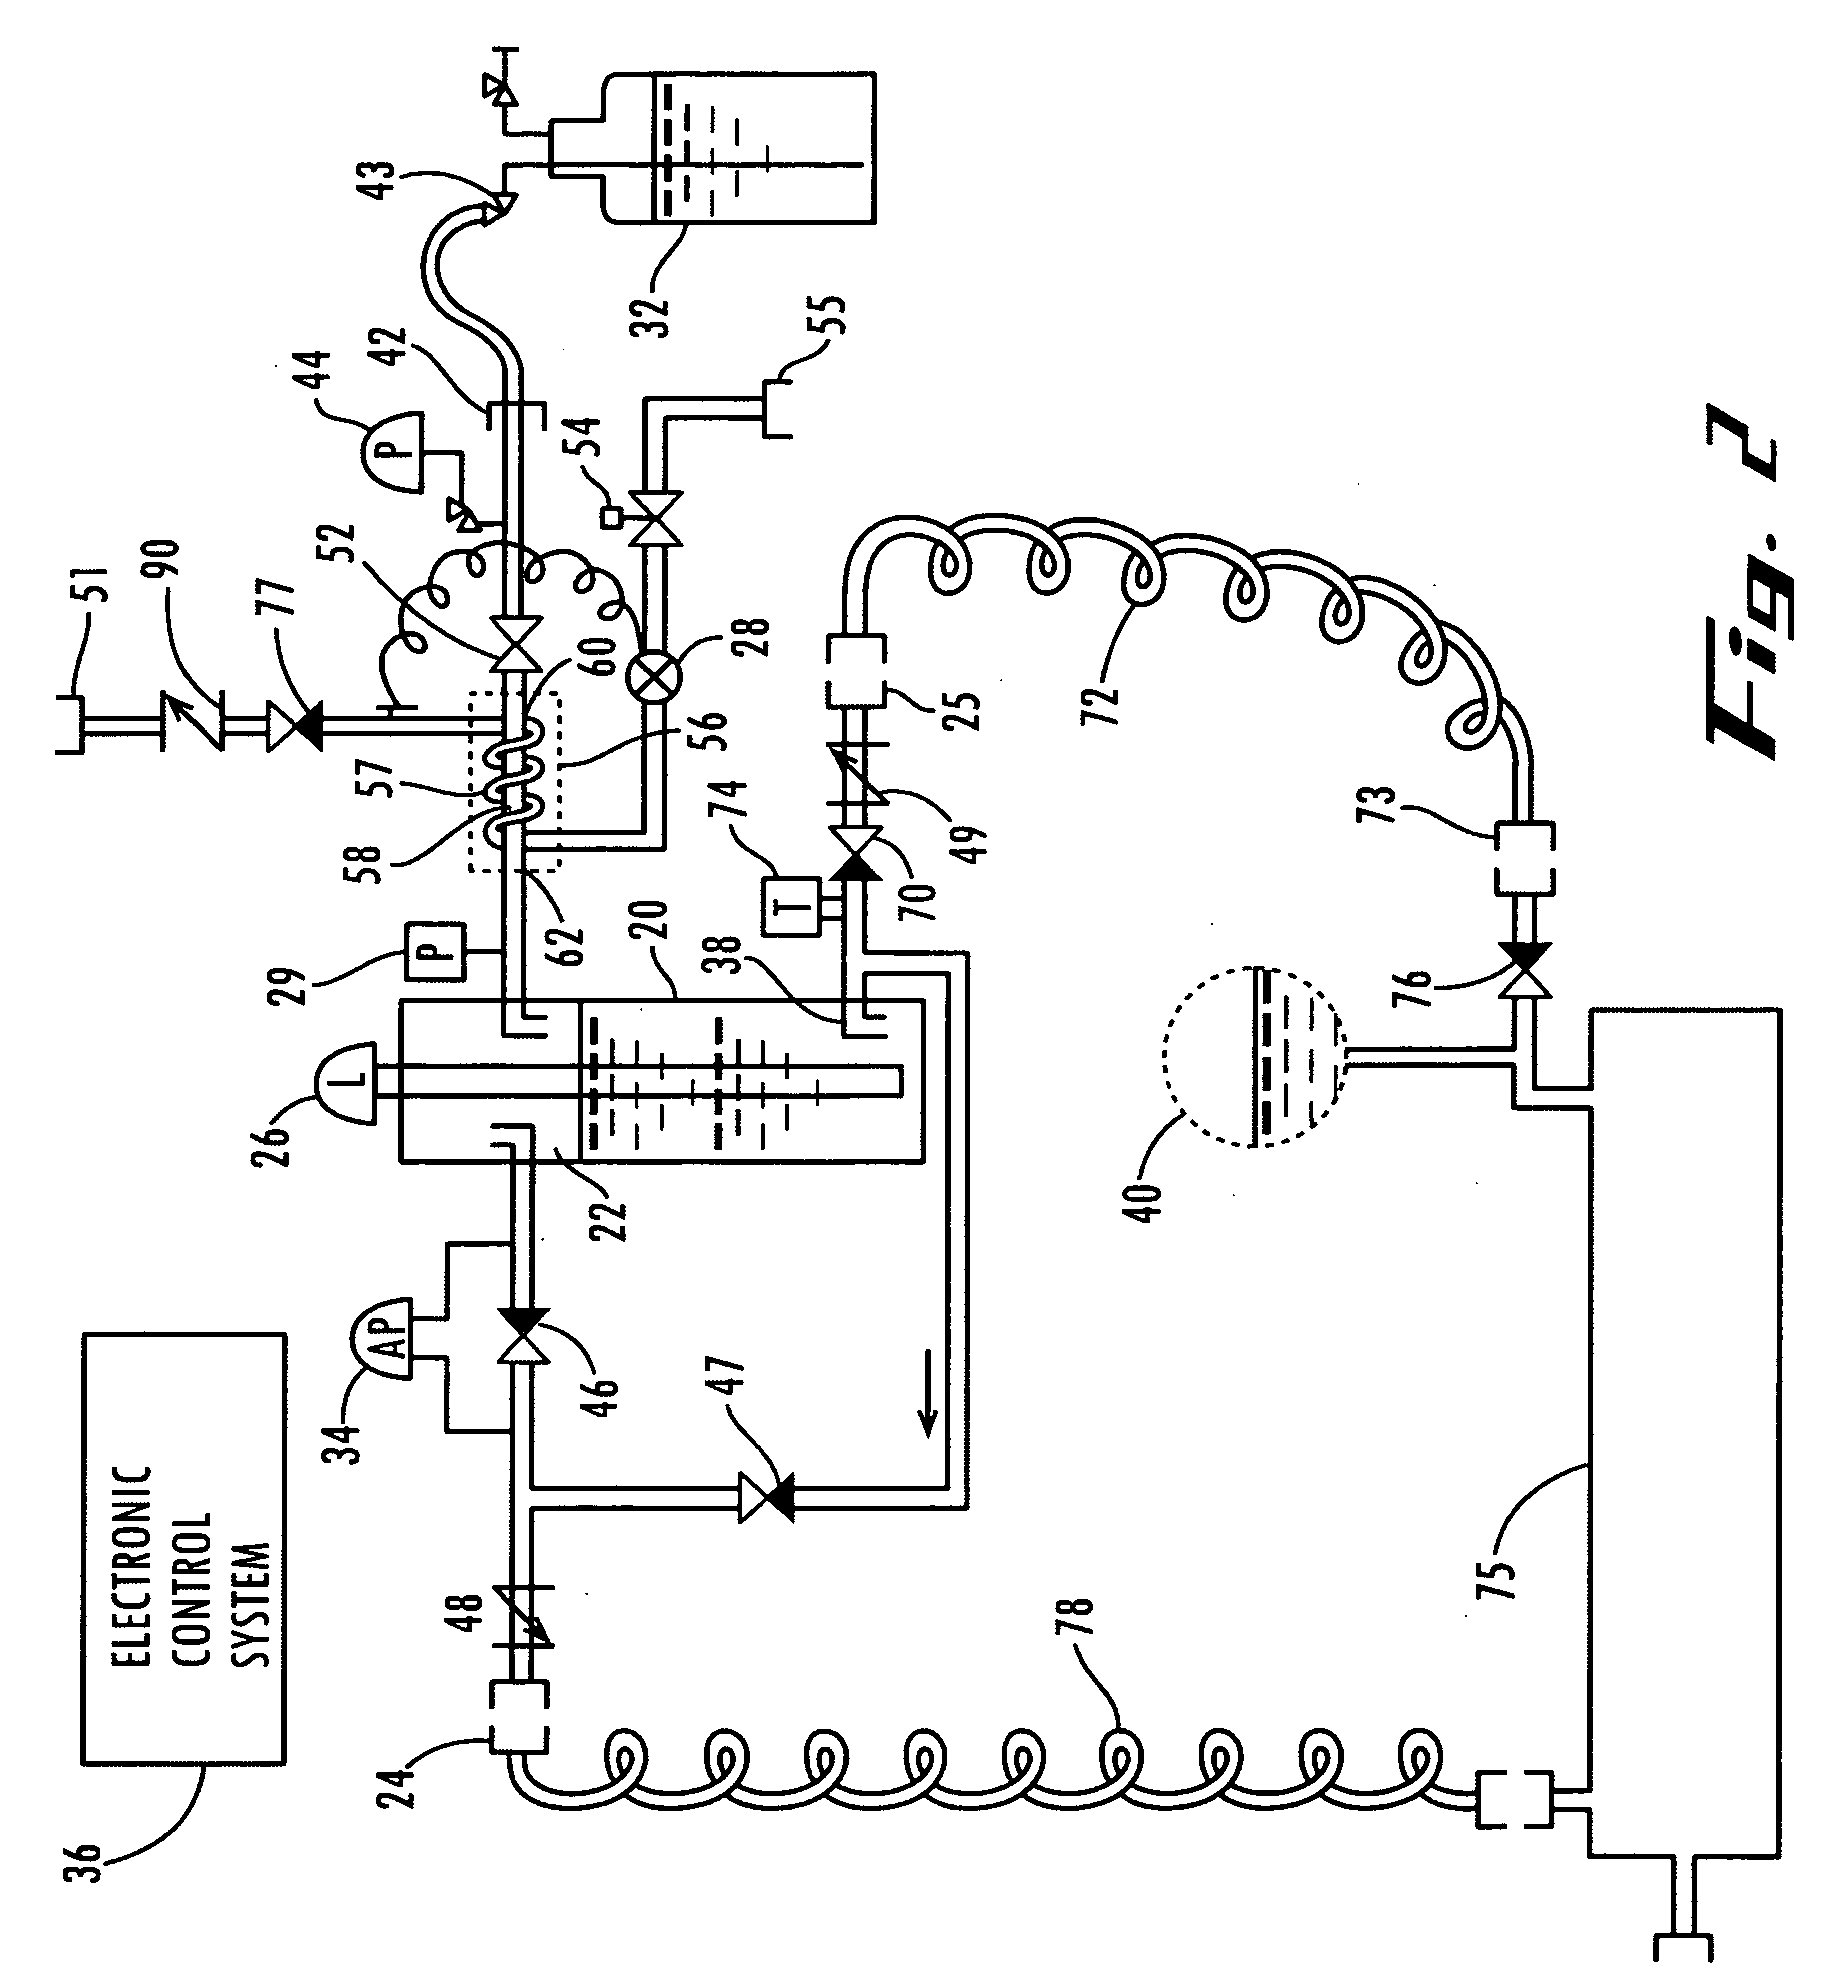 Method and apparatus to measure and transfer liquefied refrigerant in a refrigeration system